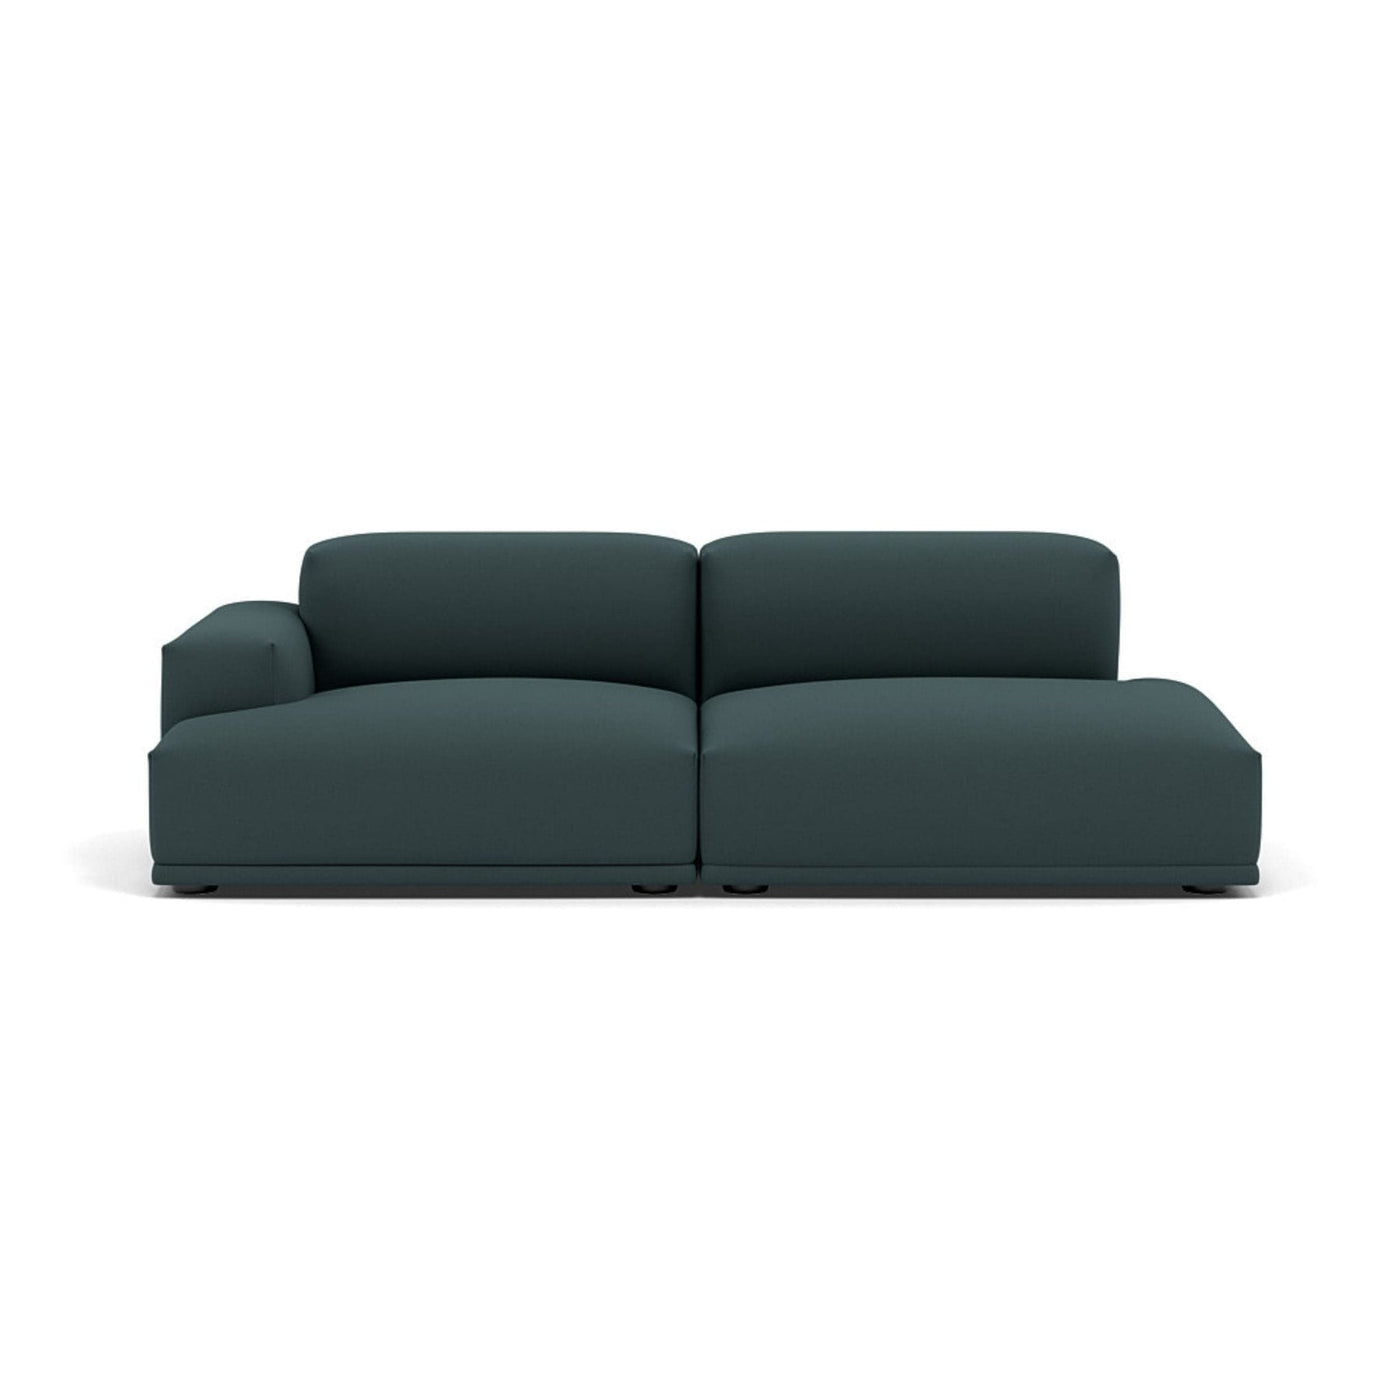 connect modular 2 seater sofa by Muuto